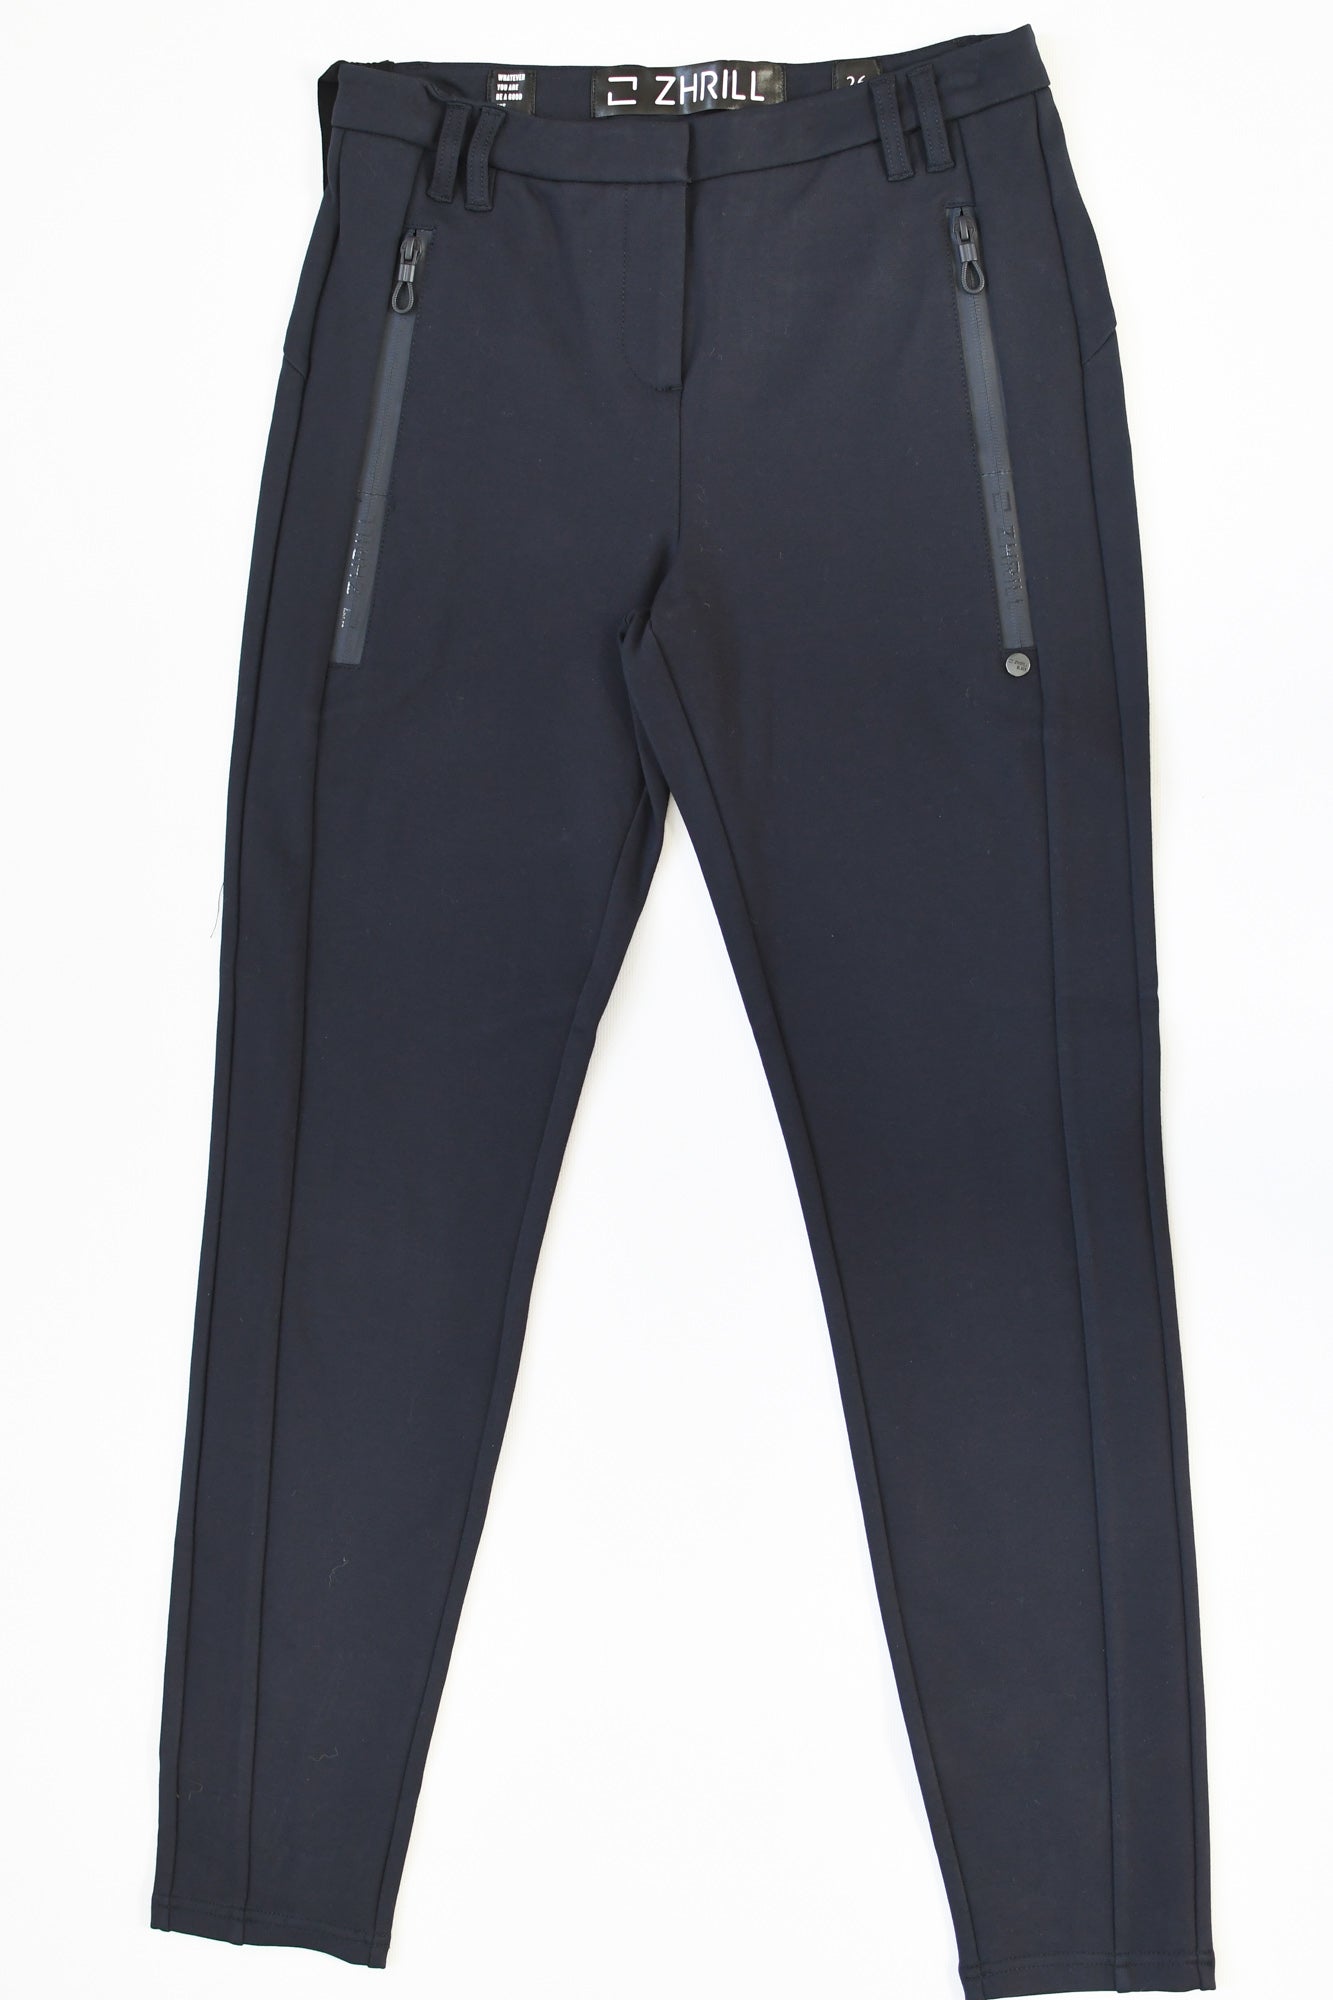 ZHRILL CHIARA SOLID BLUE  PANT